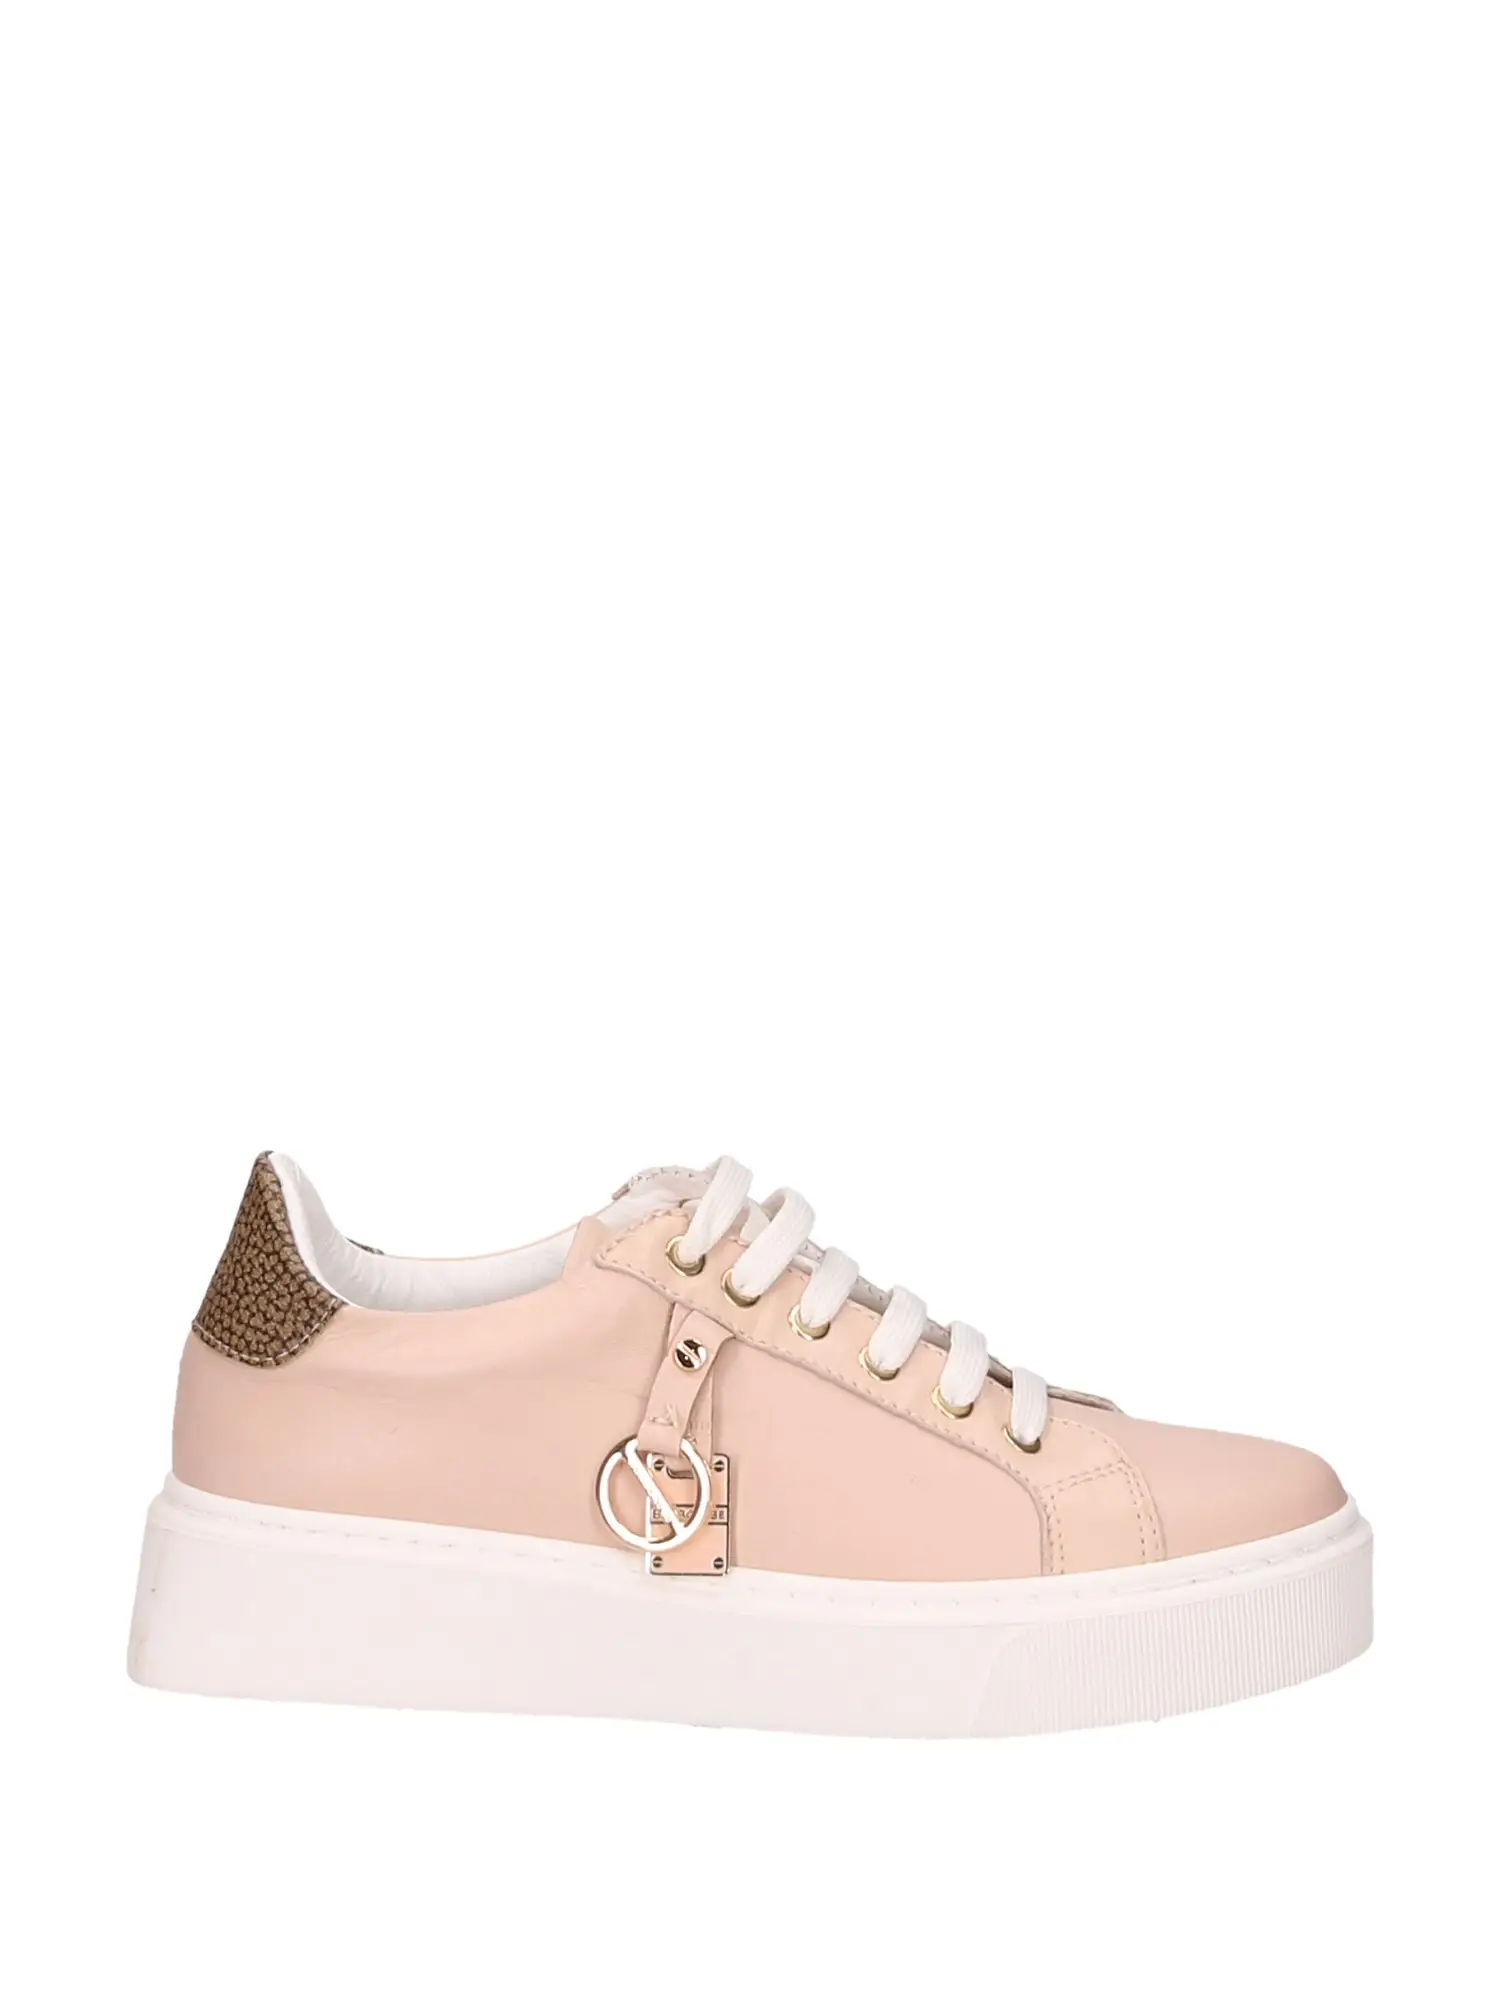 SNEAKERS DONNA - BORBONESE - 6DX901 - ROSA, 37